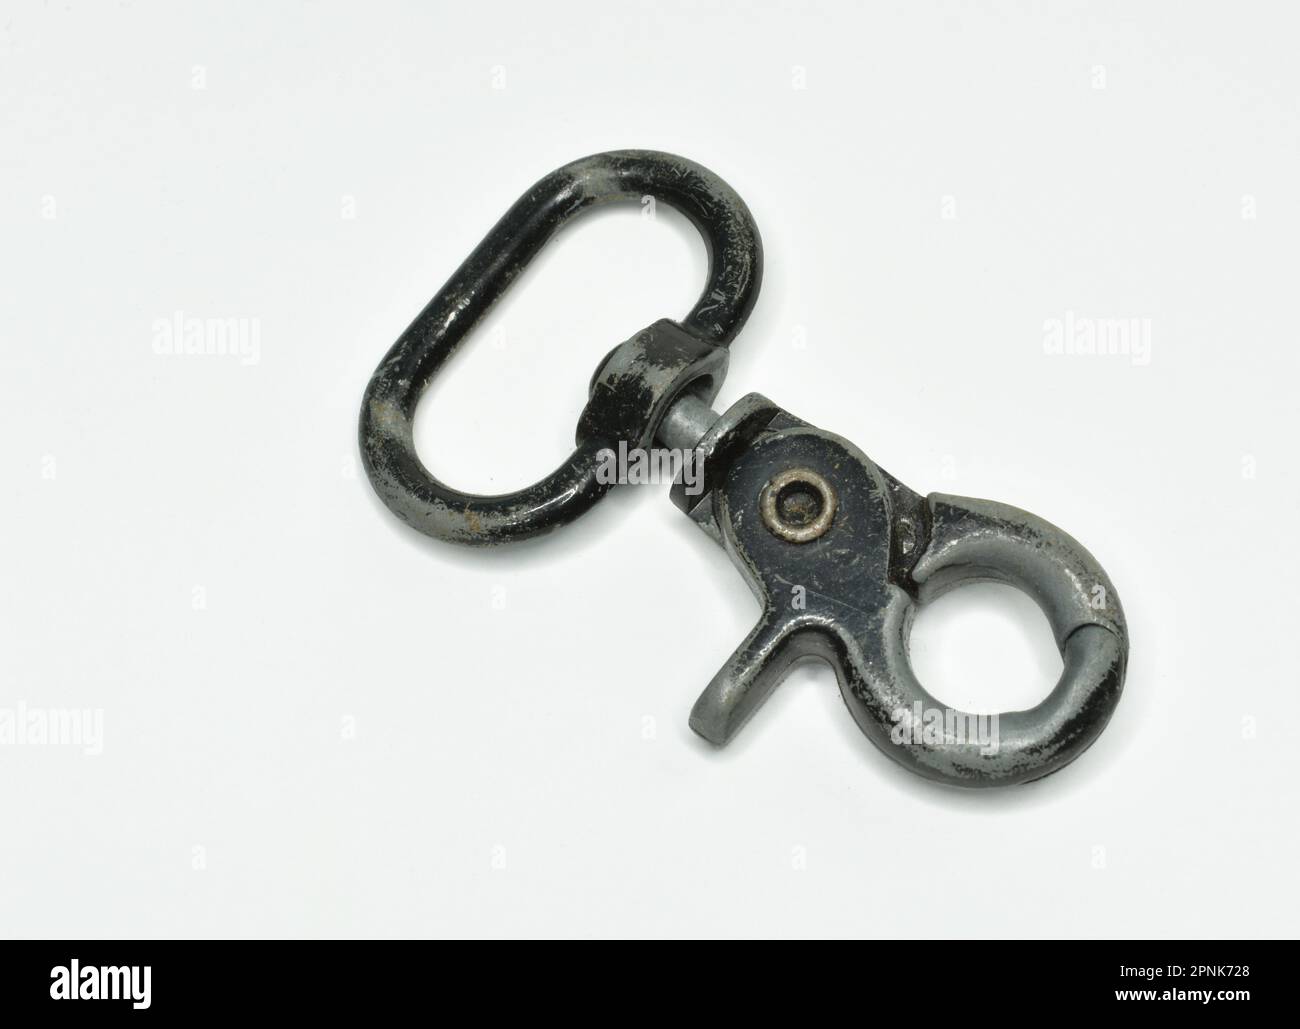 Vintage Nickel Trigger Snap, Round Swivel Eye, Designed For Use Rope,  Chain, Animal Leashes and Other Home, Farm and Recreational Applications  Stock Photo - Alamy